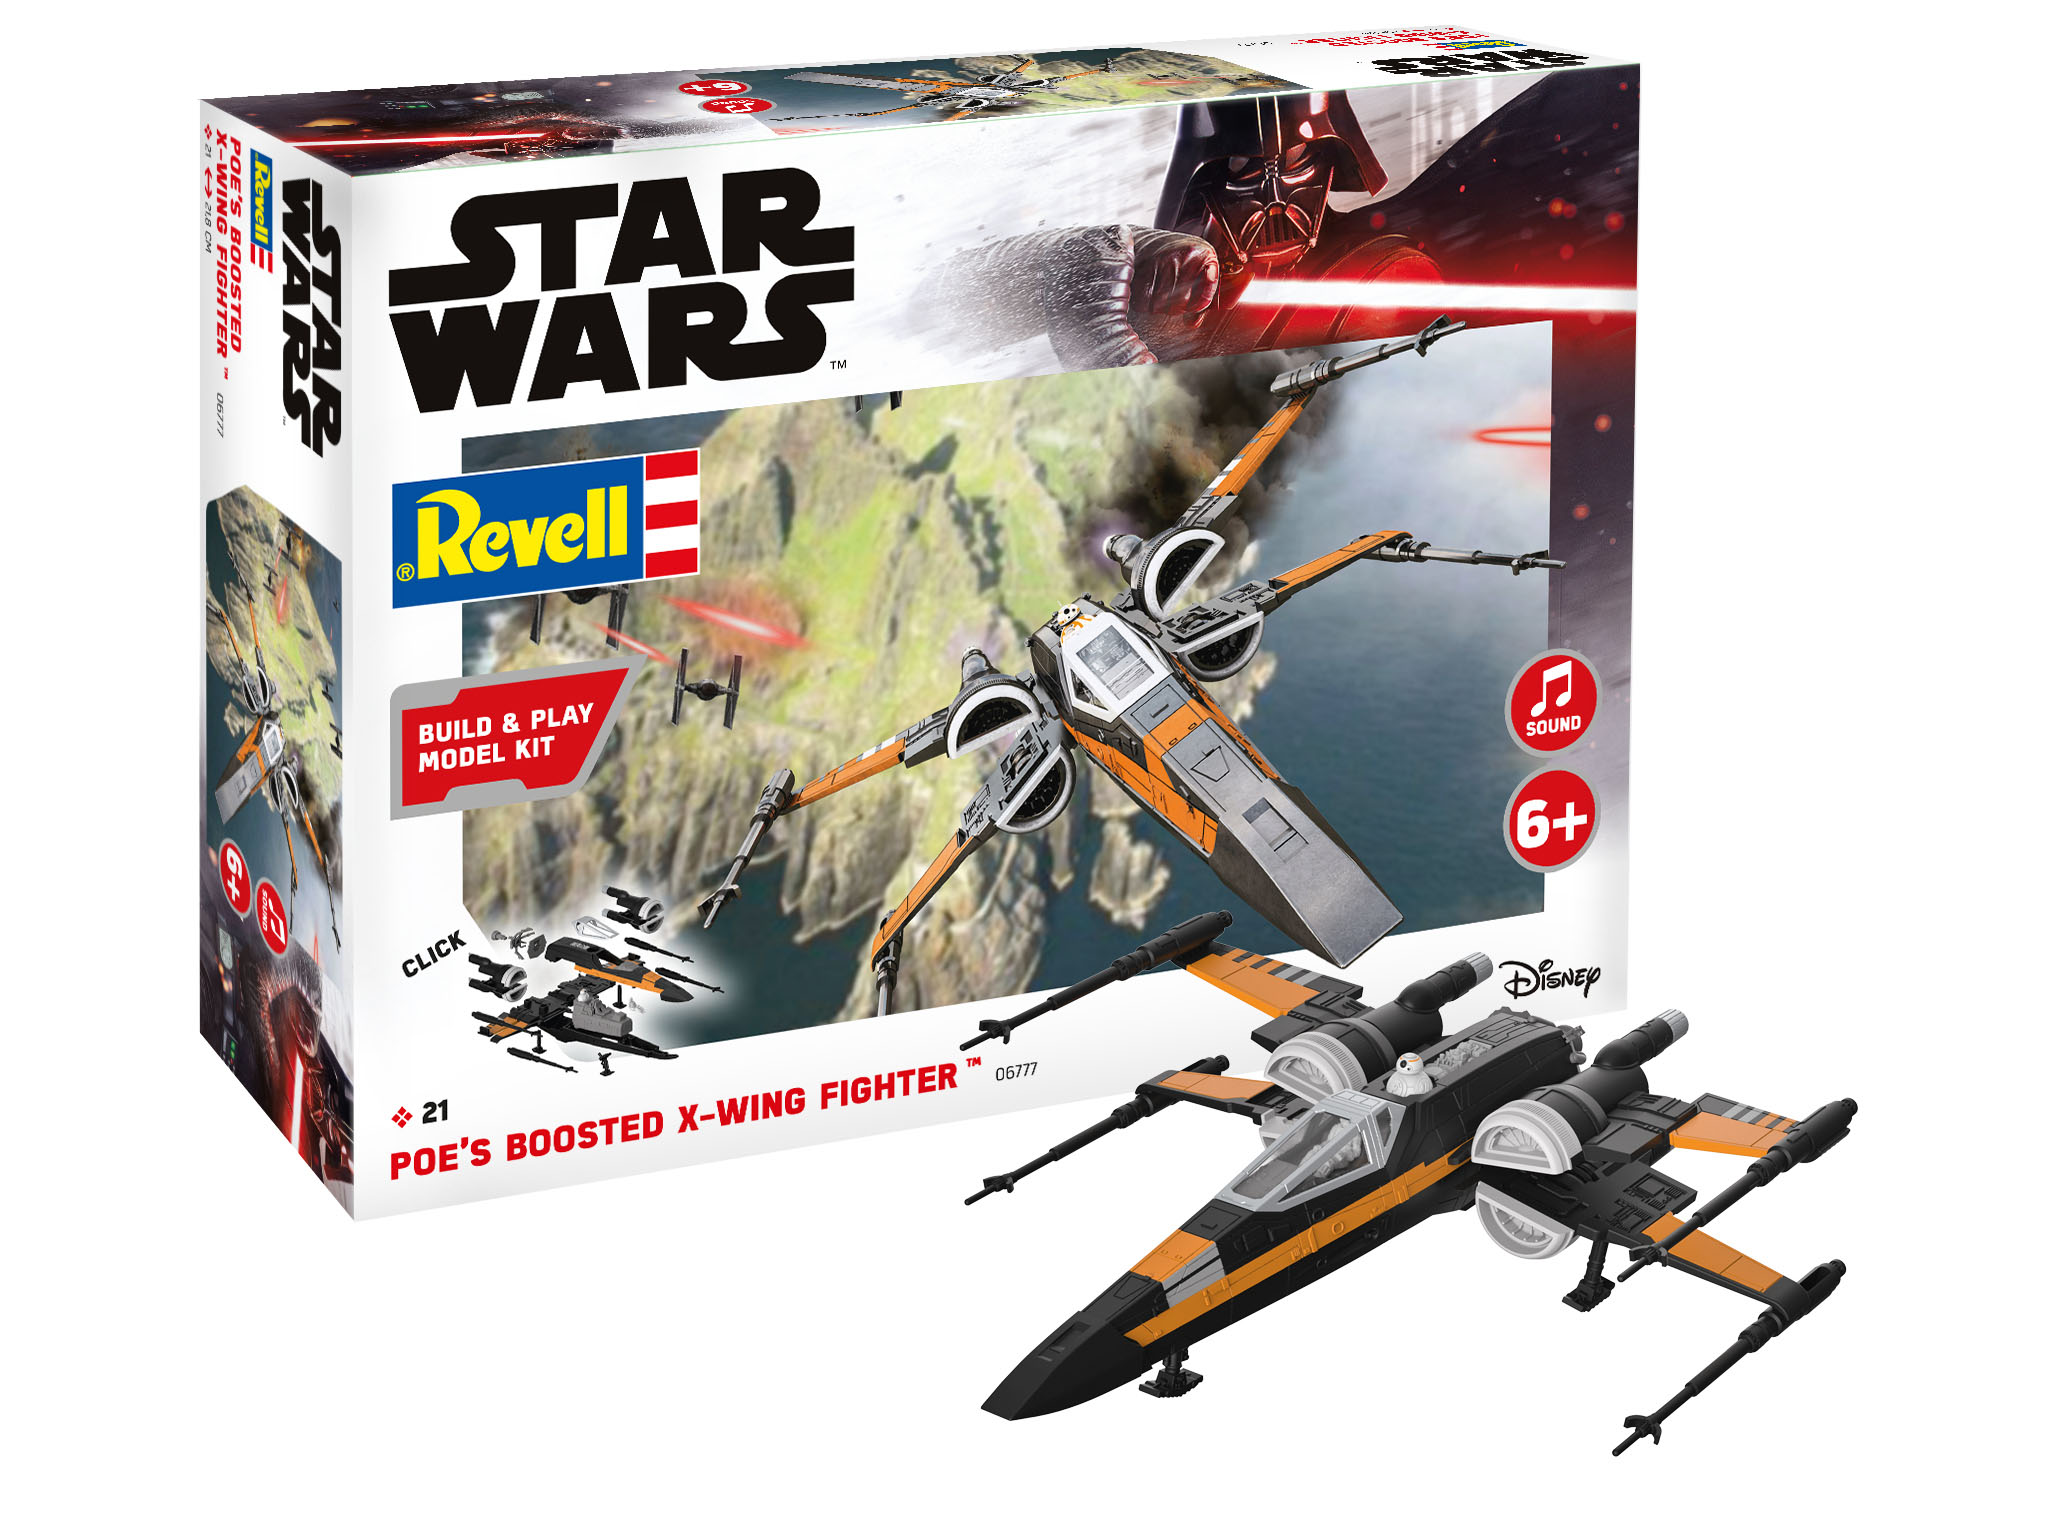 Revell Star Wars Poe's Boosted X-wing Fighter 1:78 bouwpakket easy click systeem